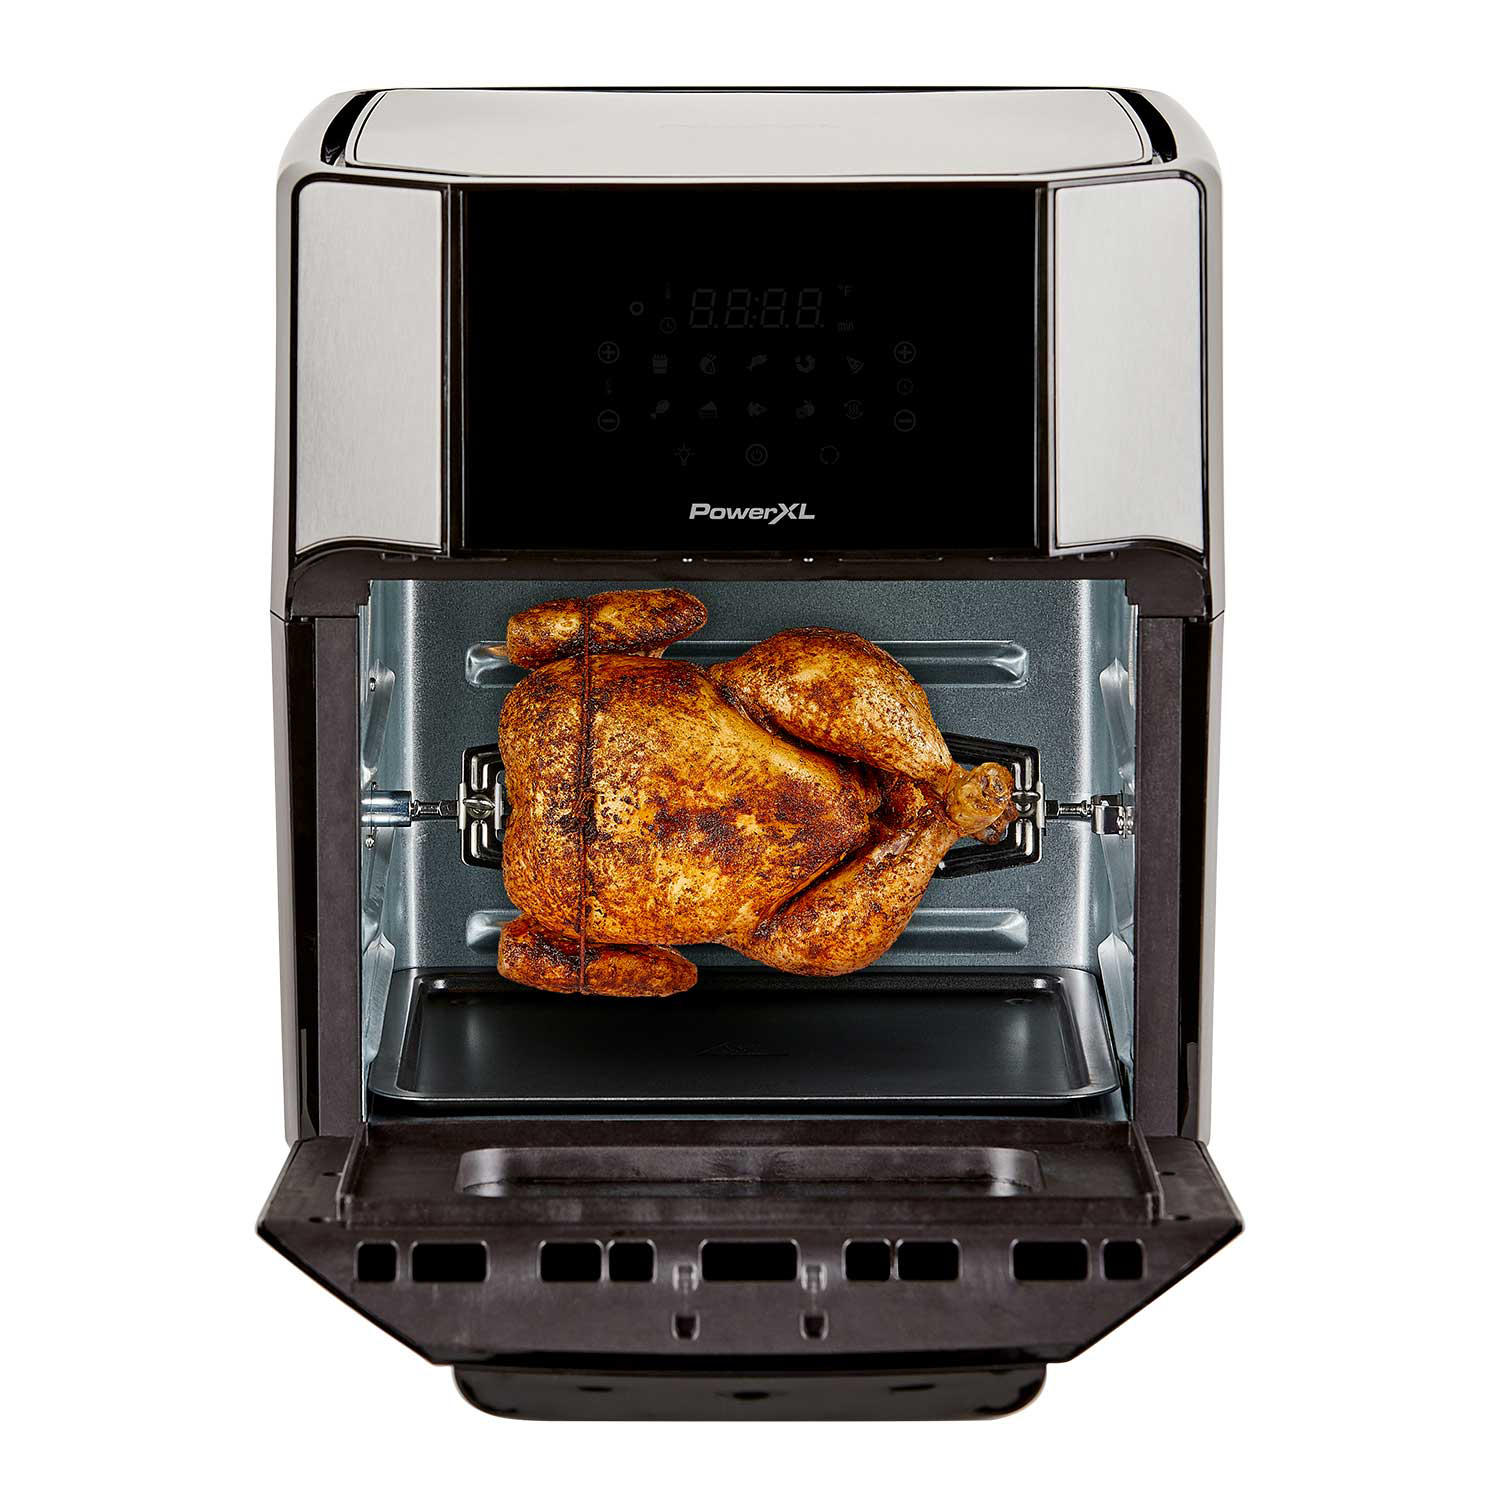 Fryer Oven Digital Display 8 Quart Large AirFryer Cooker 12 Touch Cooking  Presets, XL Air Fryer Basket 1700w Power Multifunction - AliExpress